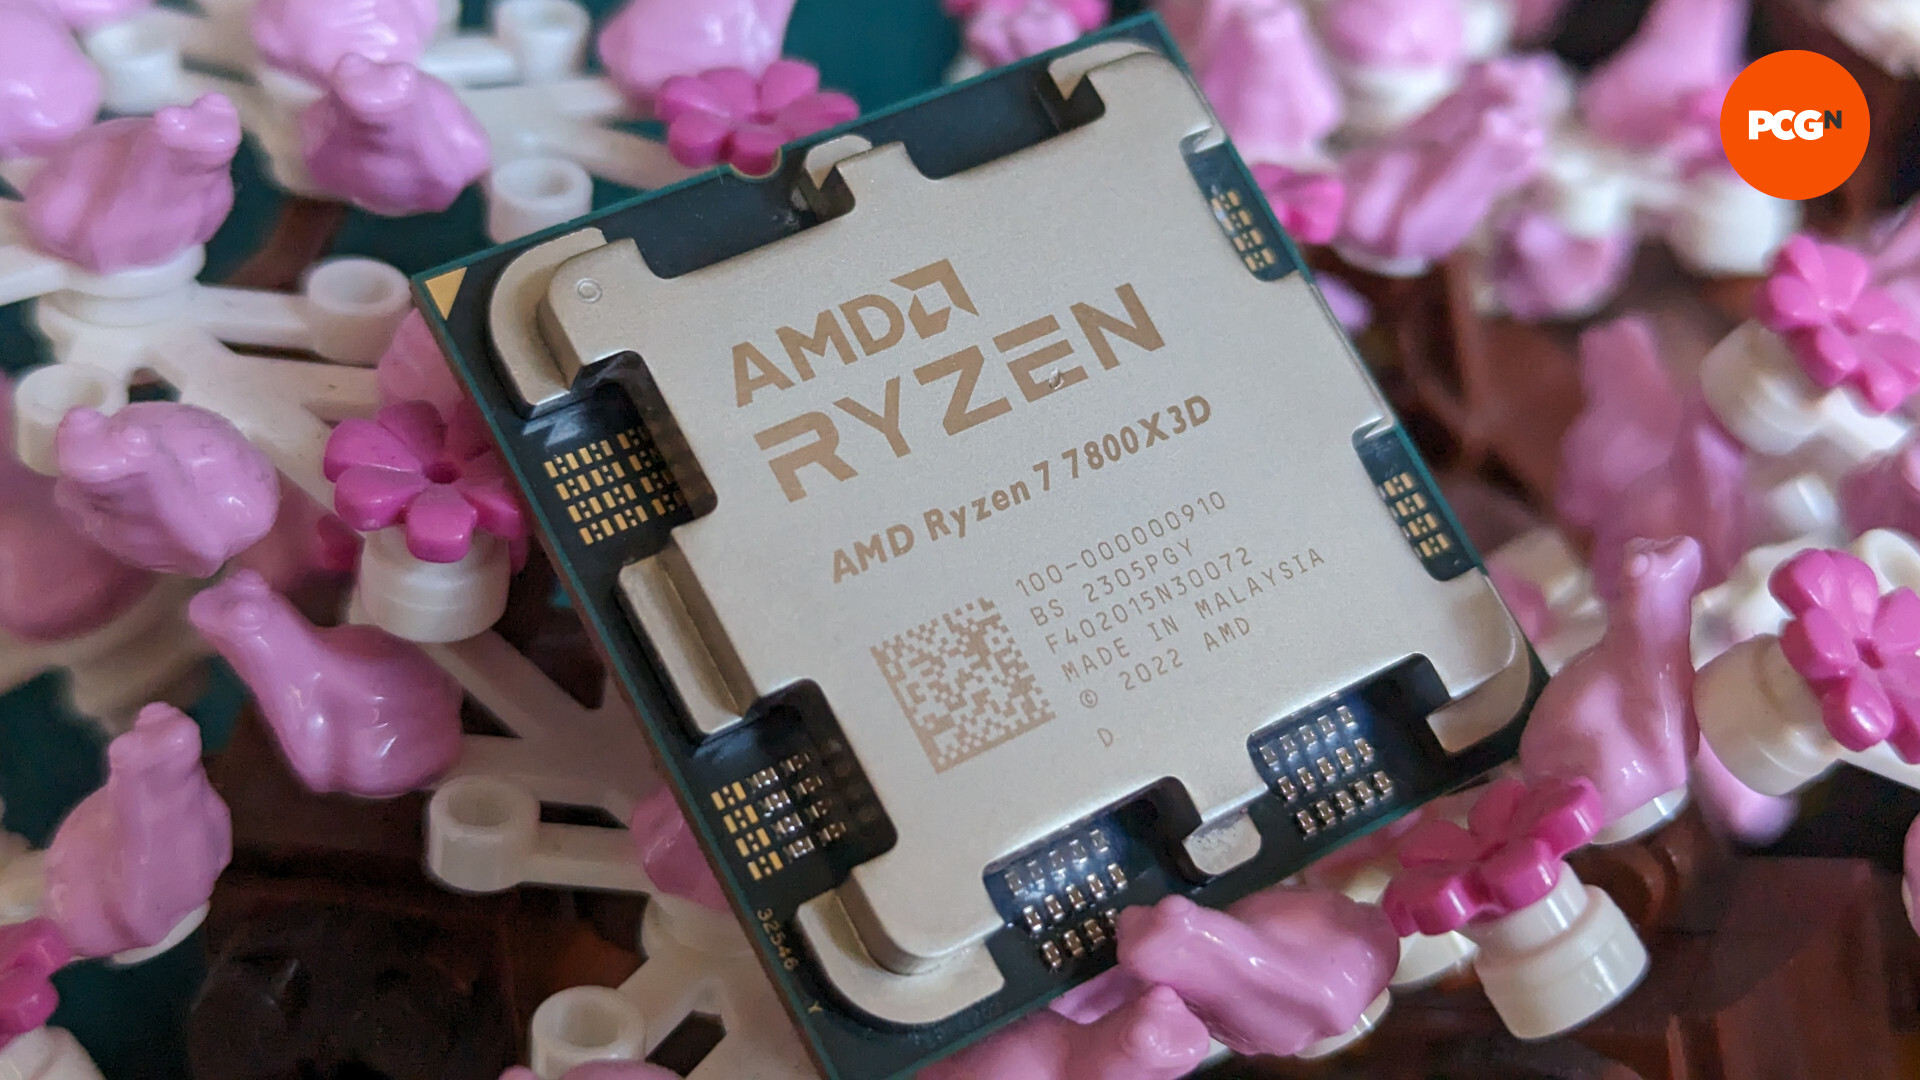 AMD Ryzen 7 7800X3D review: CPU rests against a background of pink and white Lego